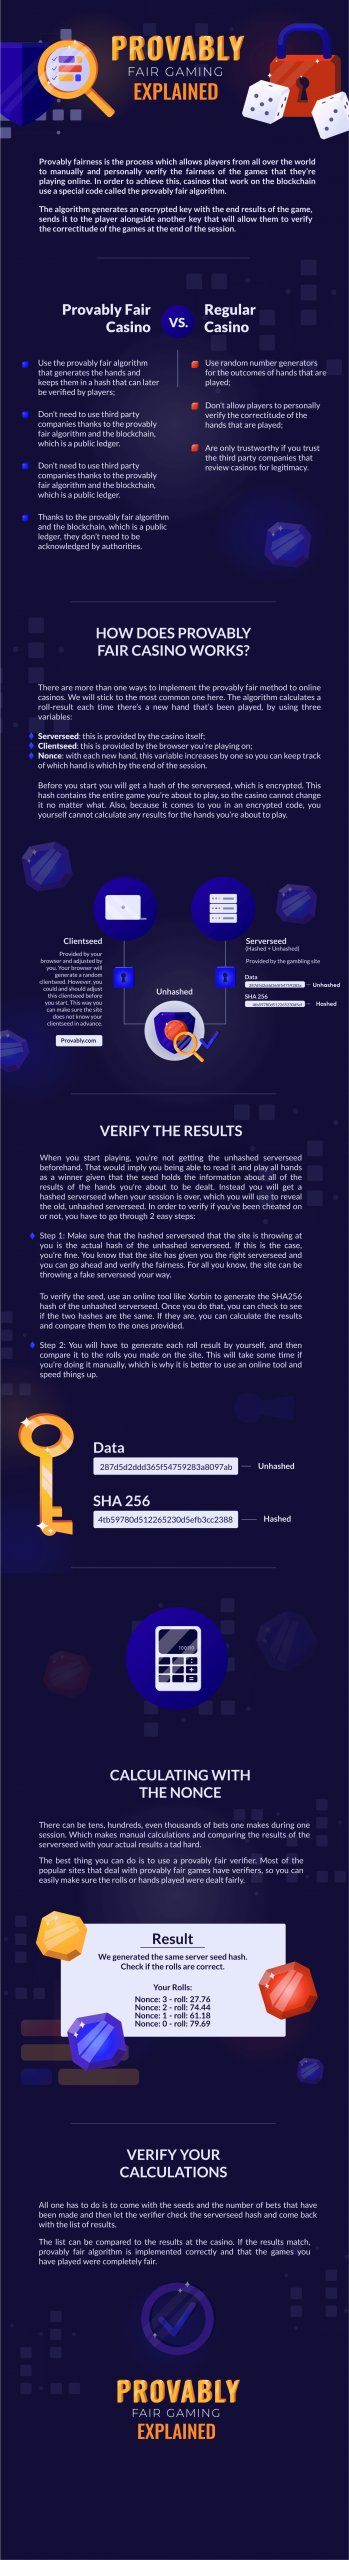 Bitcoin Casino Provably Fair Explained Infographic CasinoTops.online